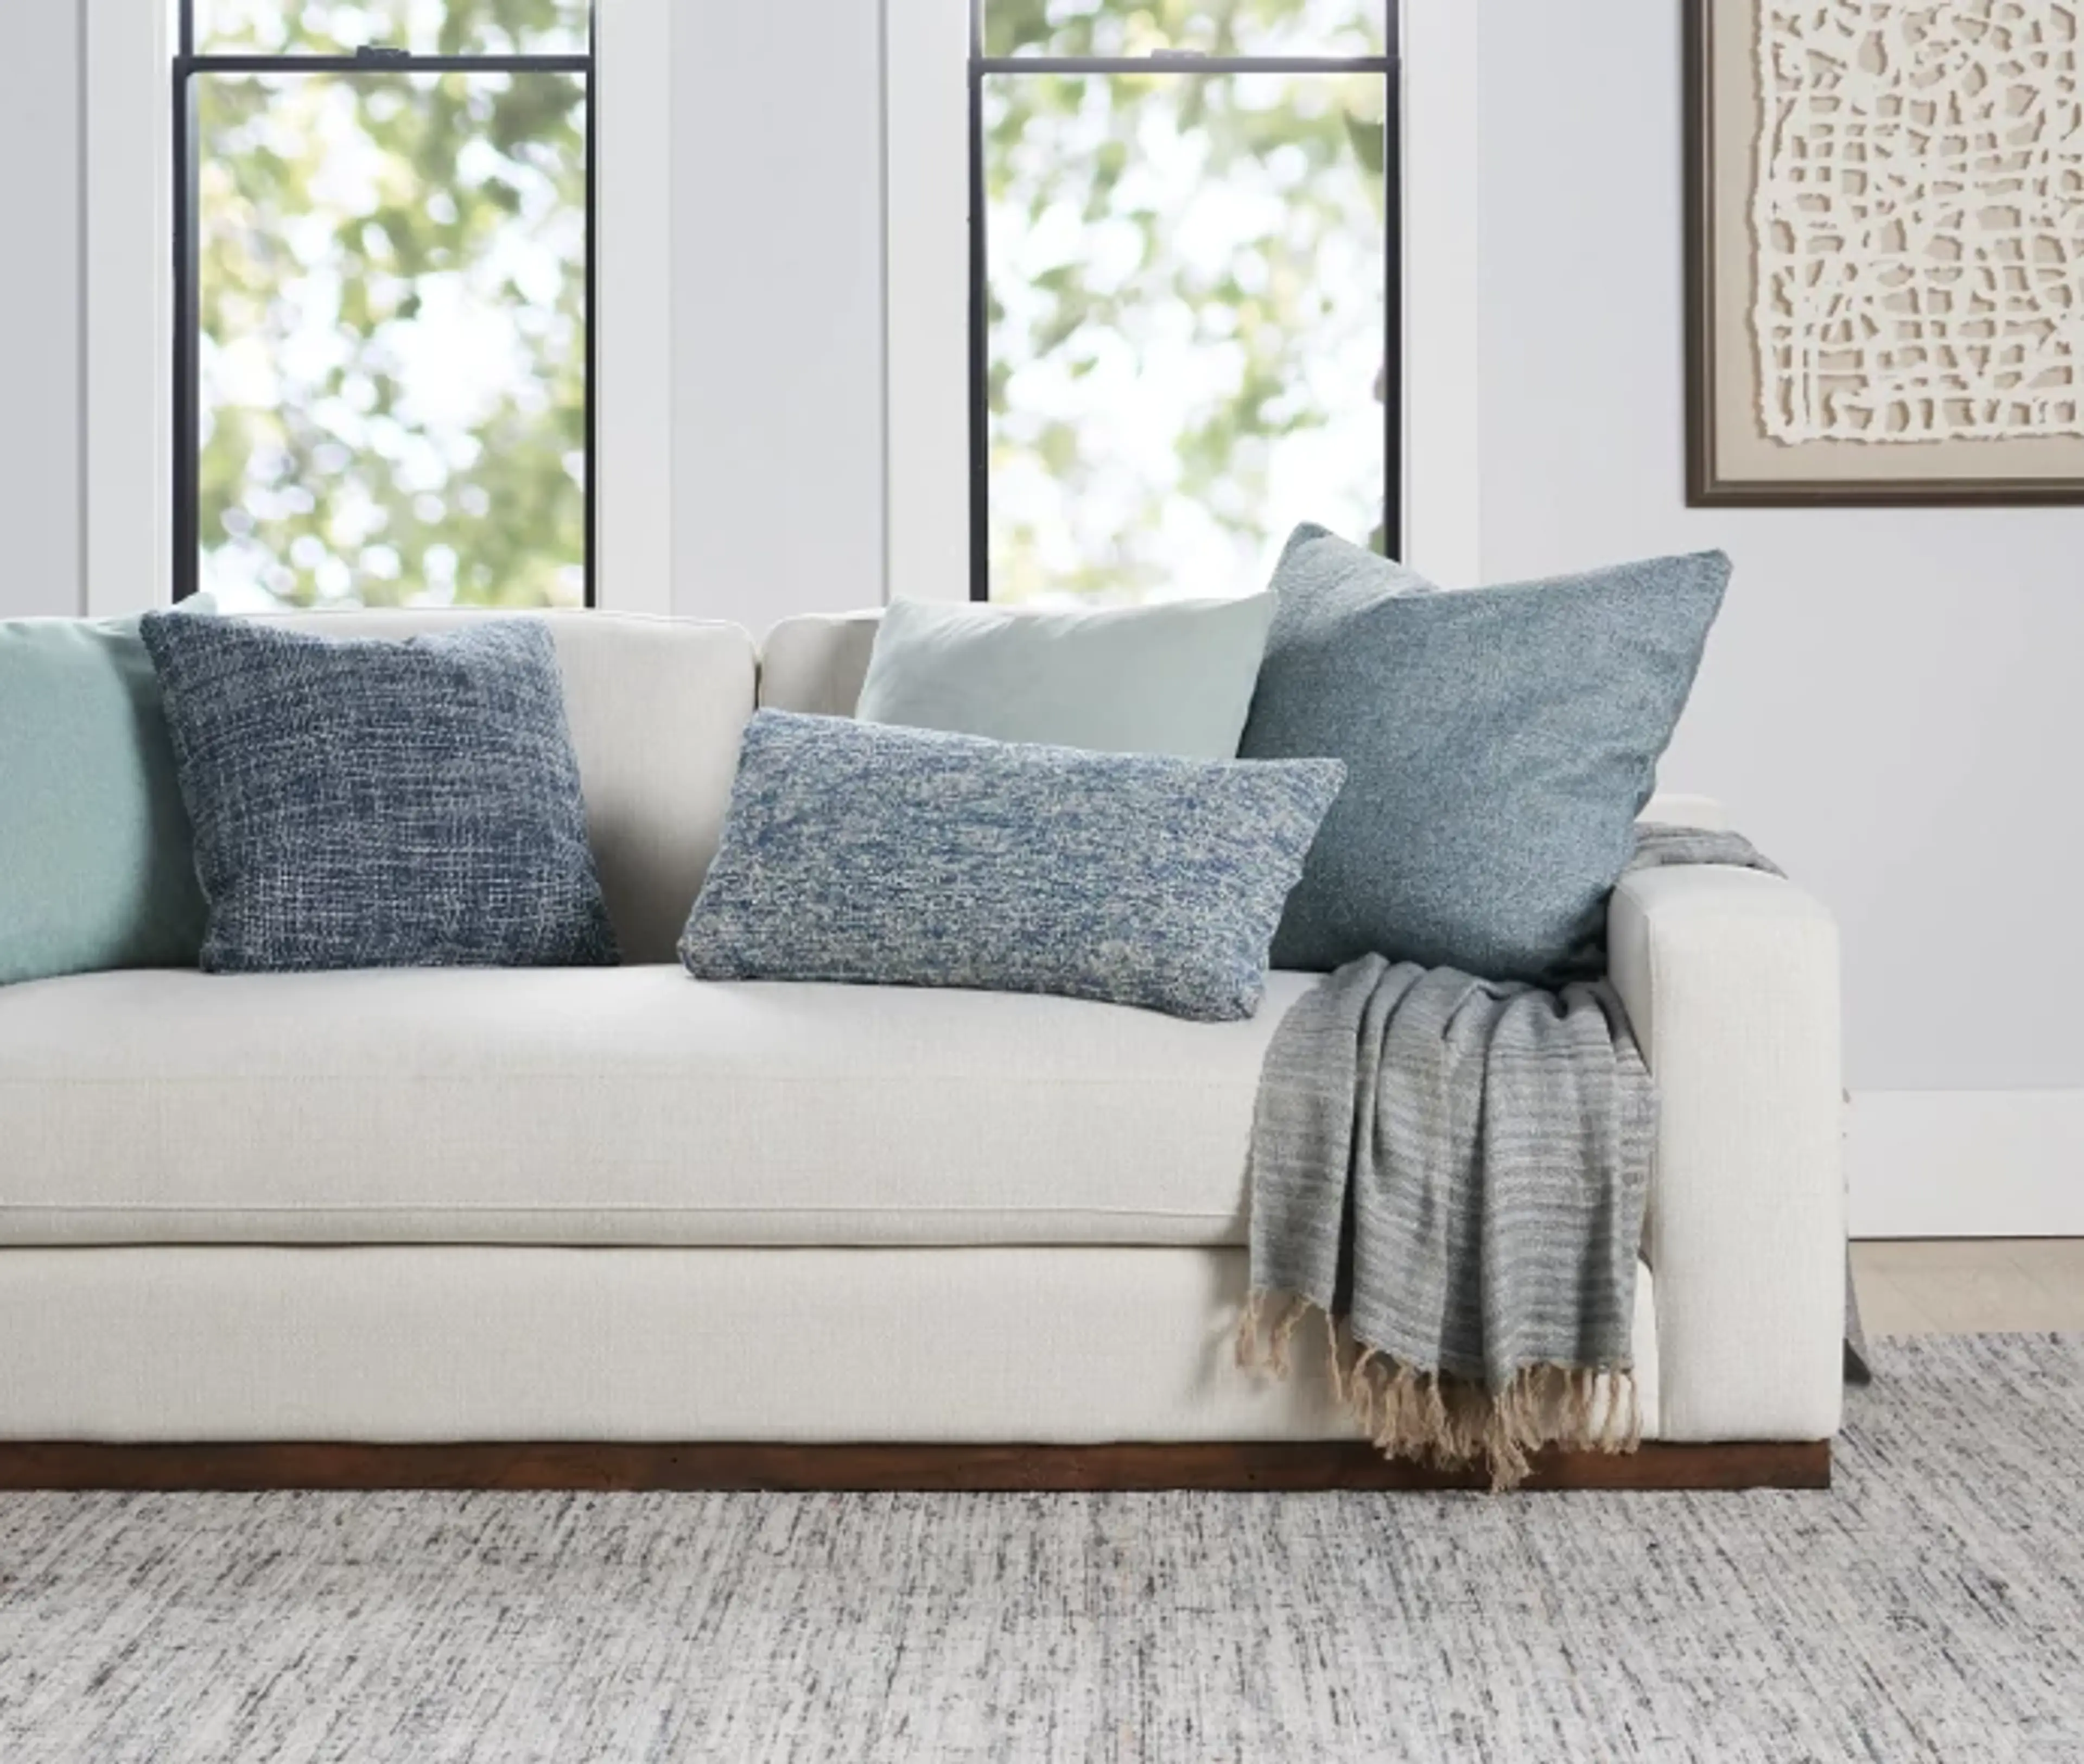 Styling Tips for Living Rooms with White Sectionals